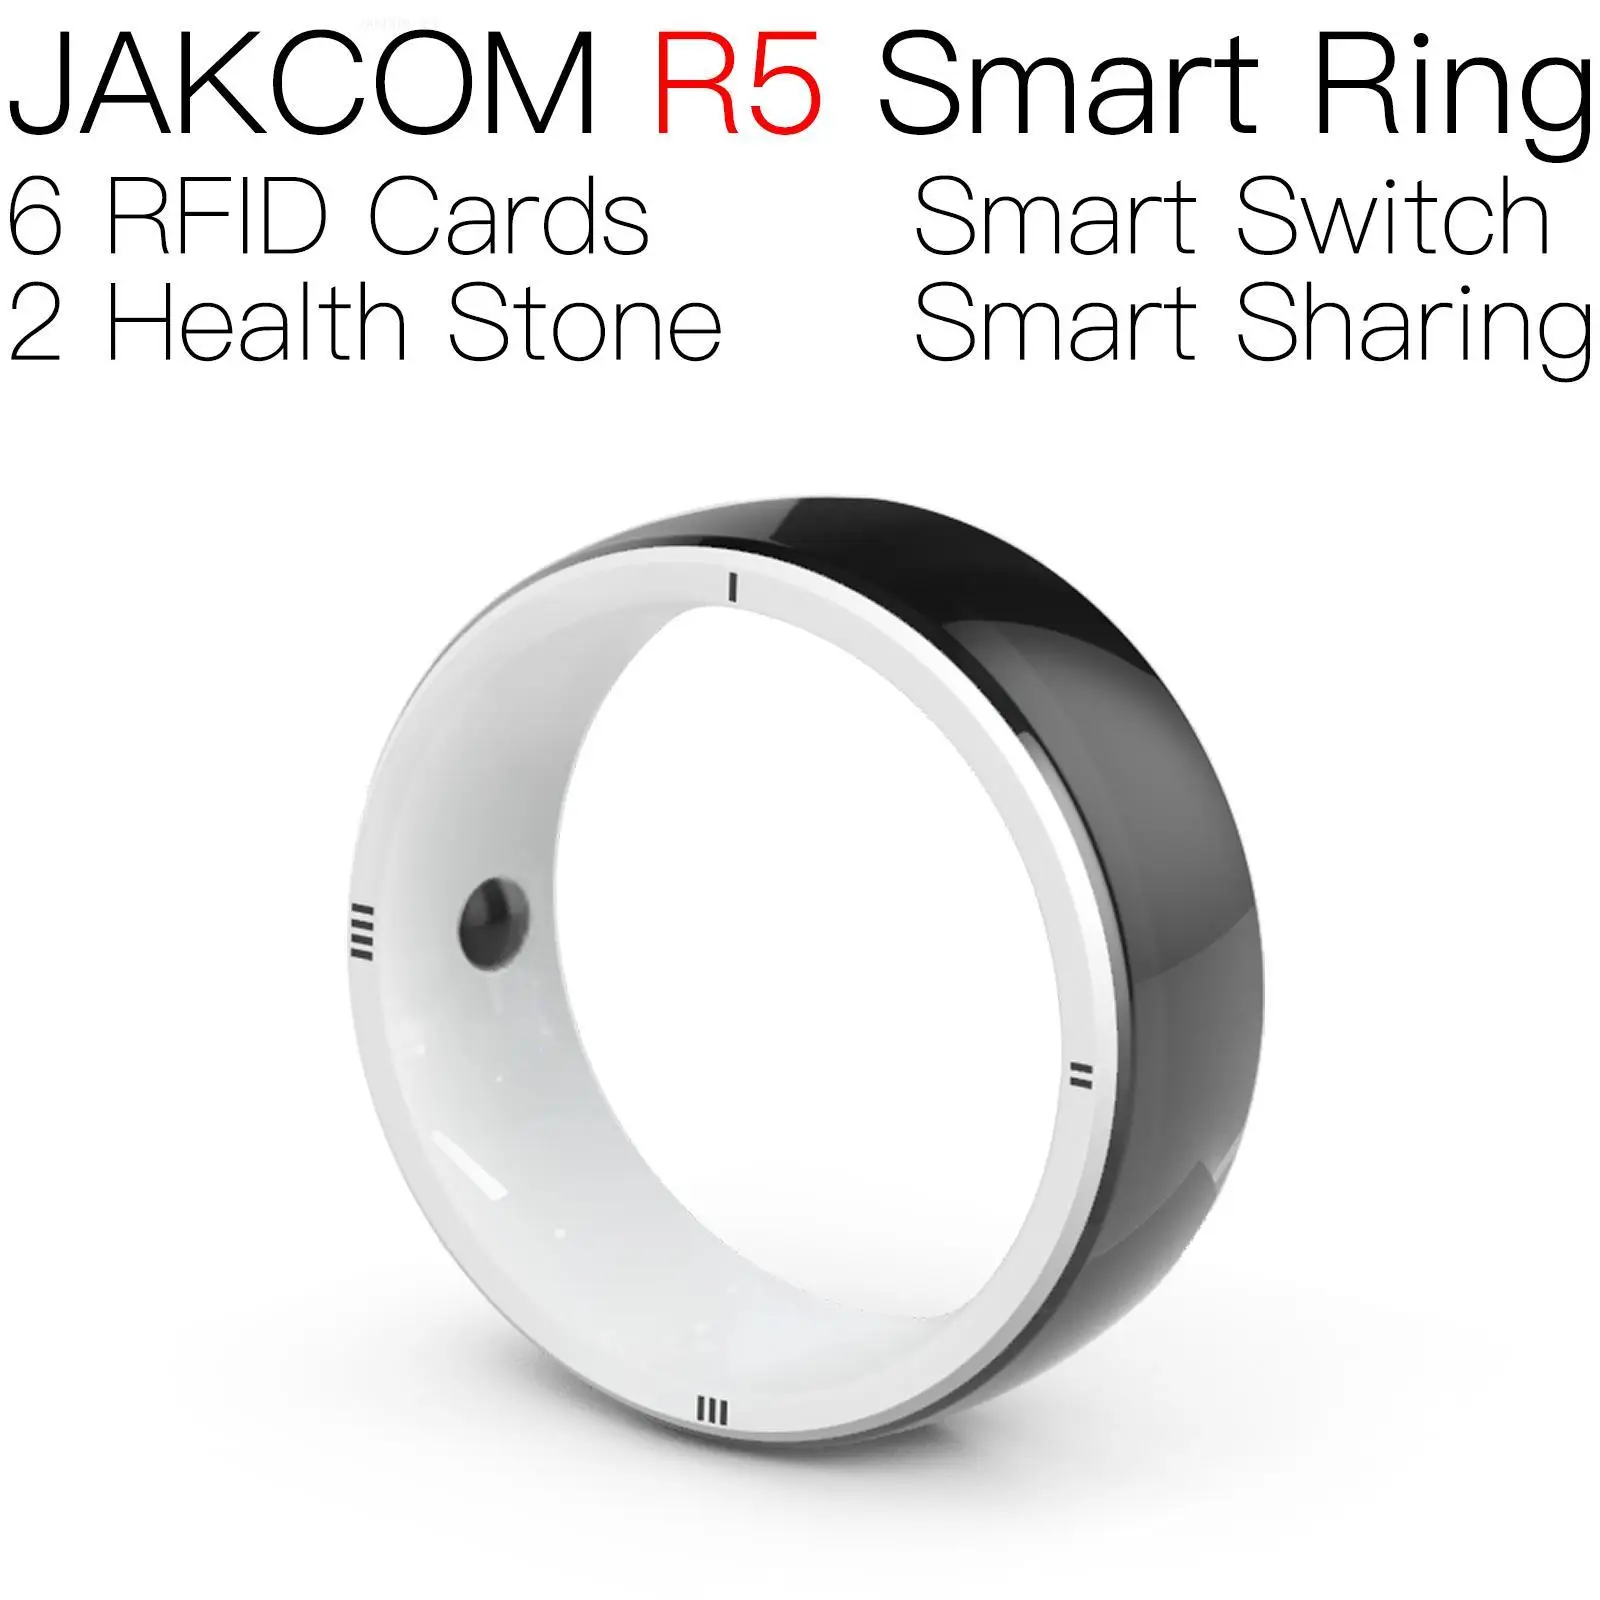 

JAKCOM R5 Smart Ring Super value than smartring rfid antenna long new user deals with free shipping truck magic chinese card